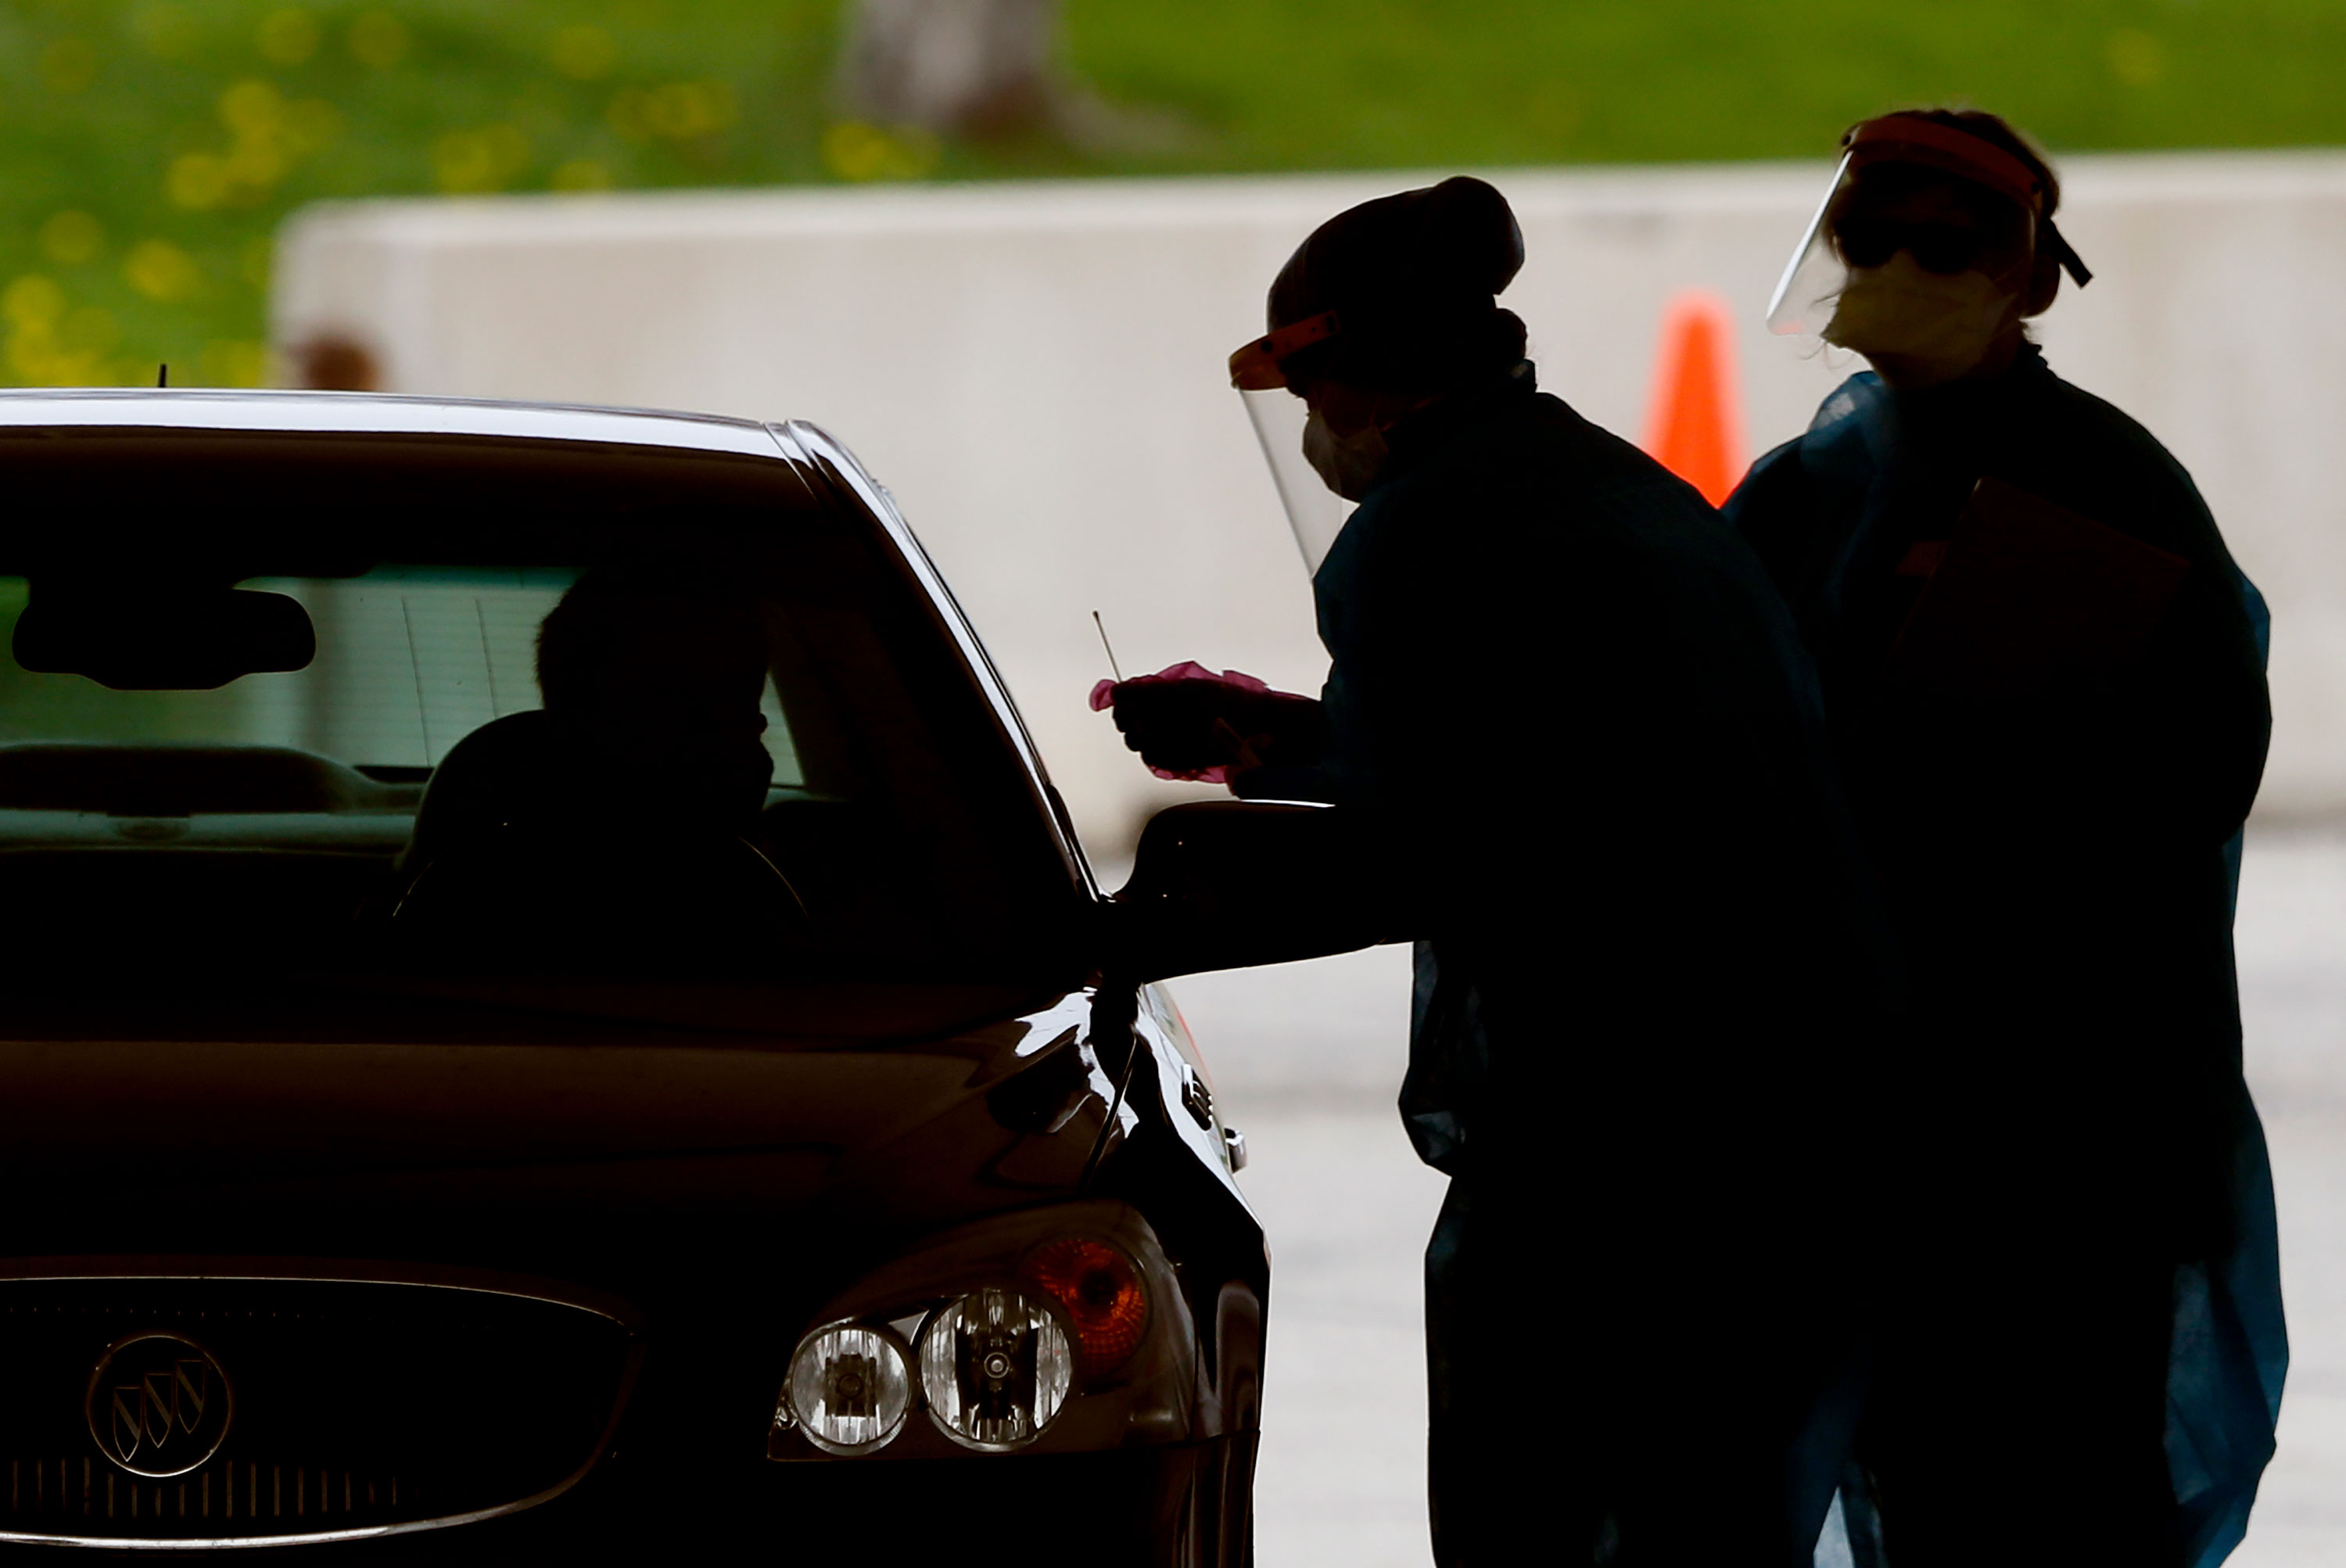 Medical workers test a local resident at a drive-thru Covid-19 testing site in Waterloo, Iowa on May 1.